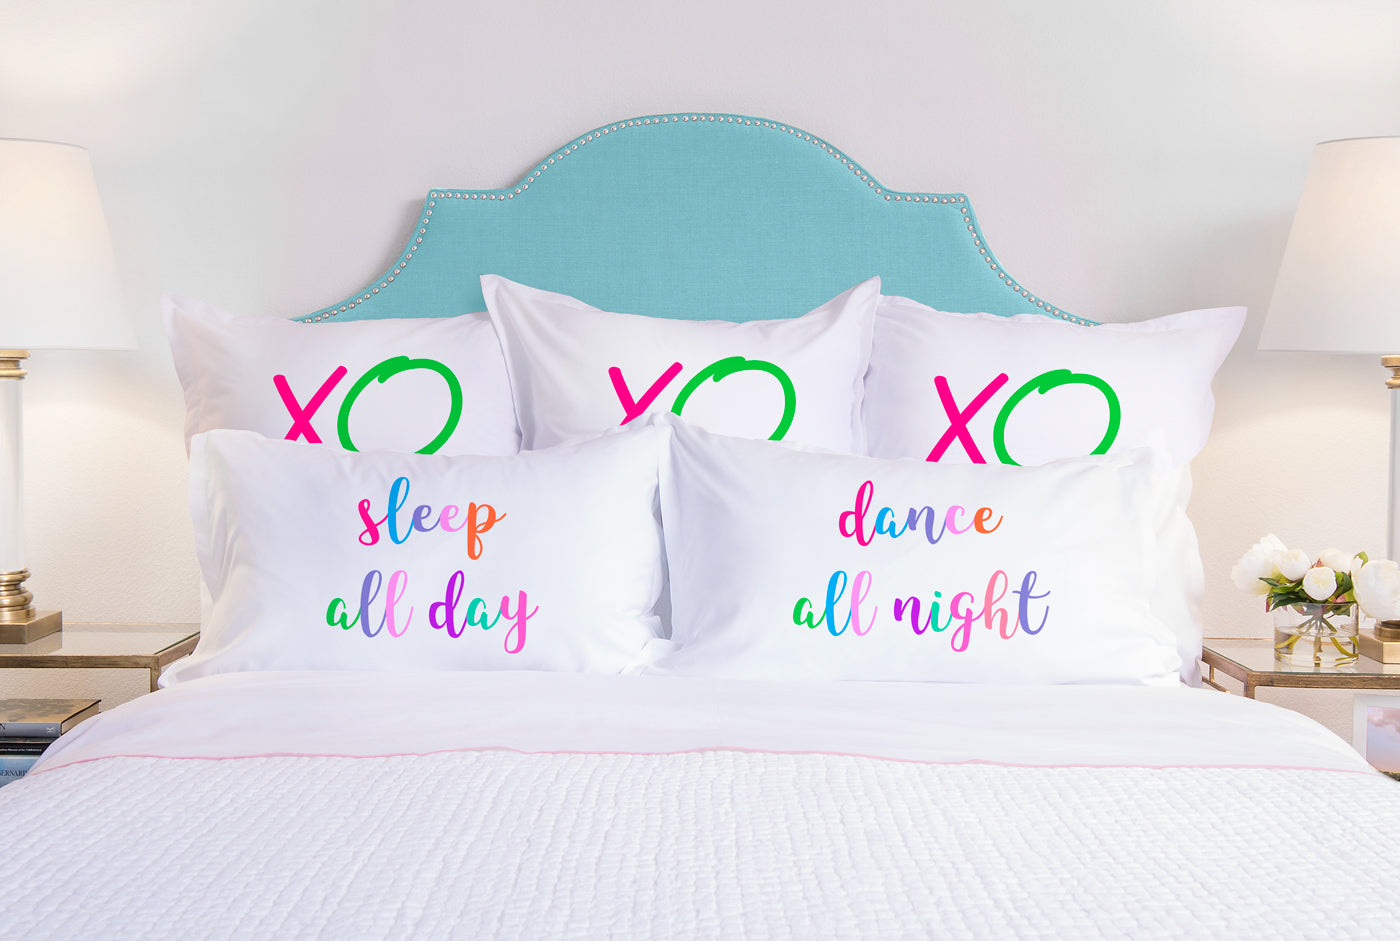 Sleep All Day, Dance All Night - His & Hers Pillowcase Collection-Di Lewis